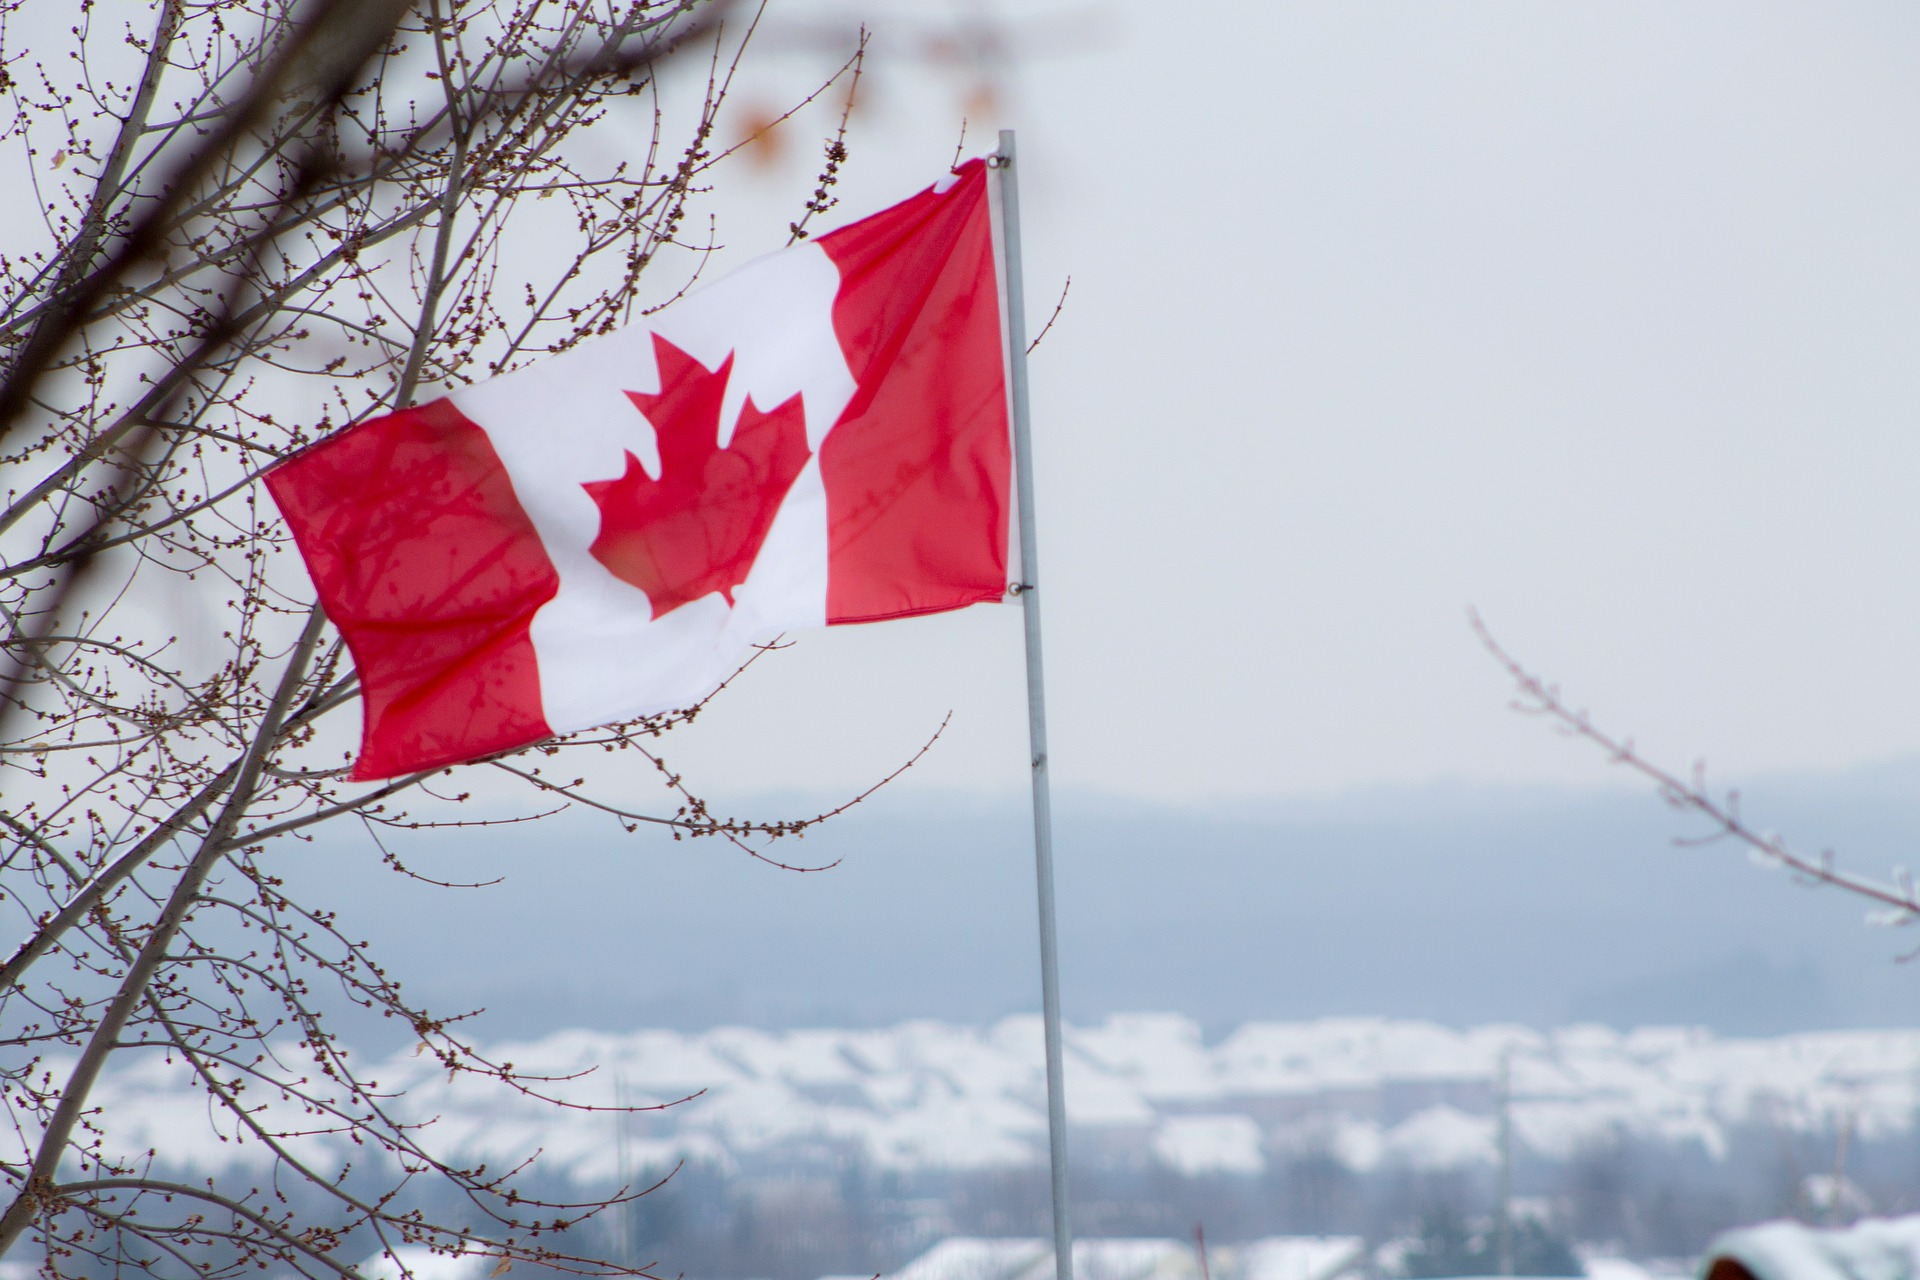 Canadian flag on a pole. It is partially obstructed by bare tree branches. The background is a blurred out city by the water.